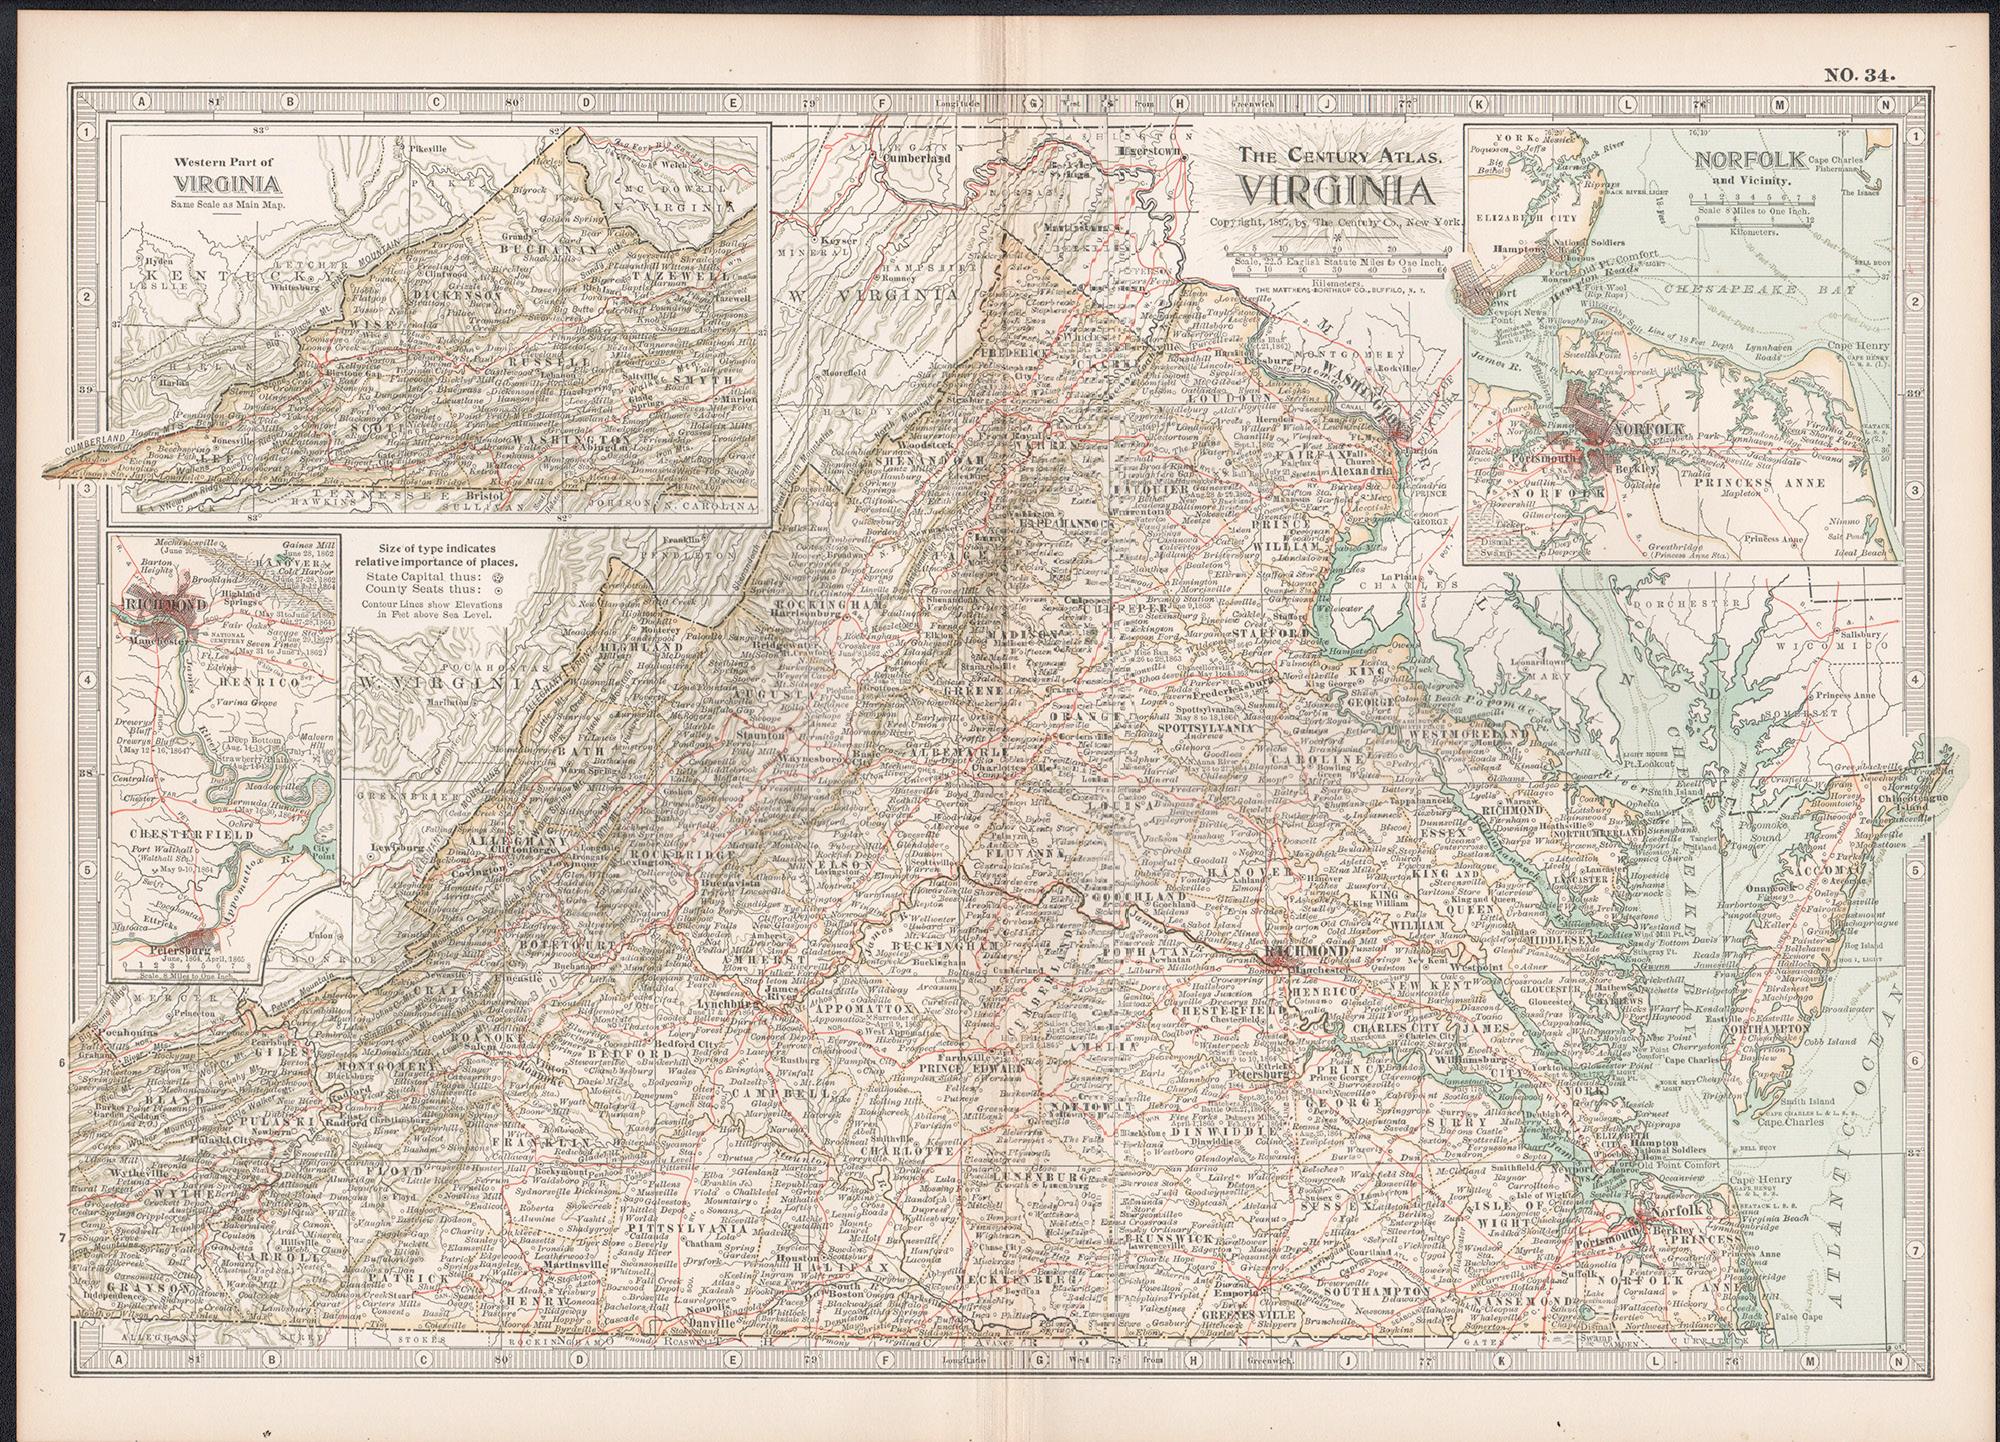 Virginia. USA. Century Atlas state antique vintage map - Print by Unknown